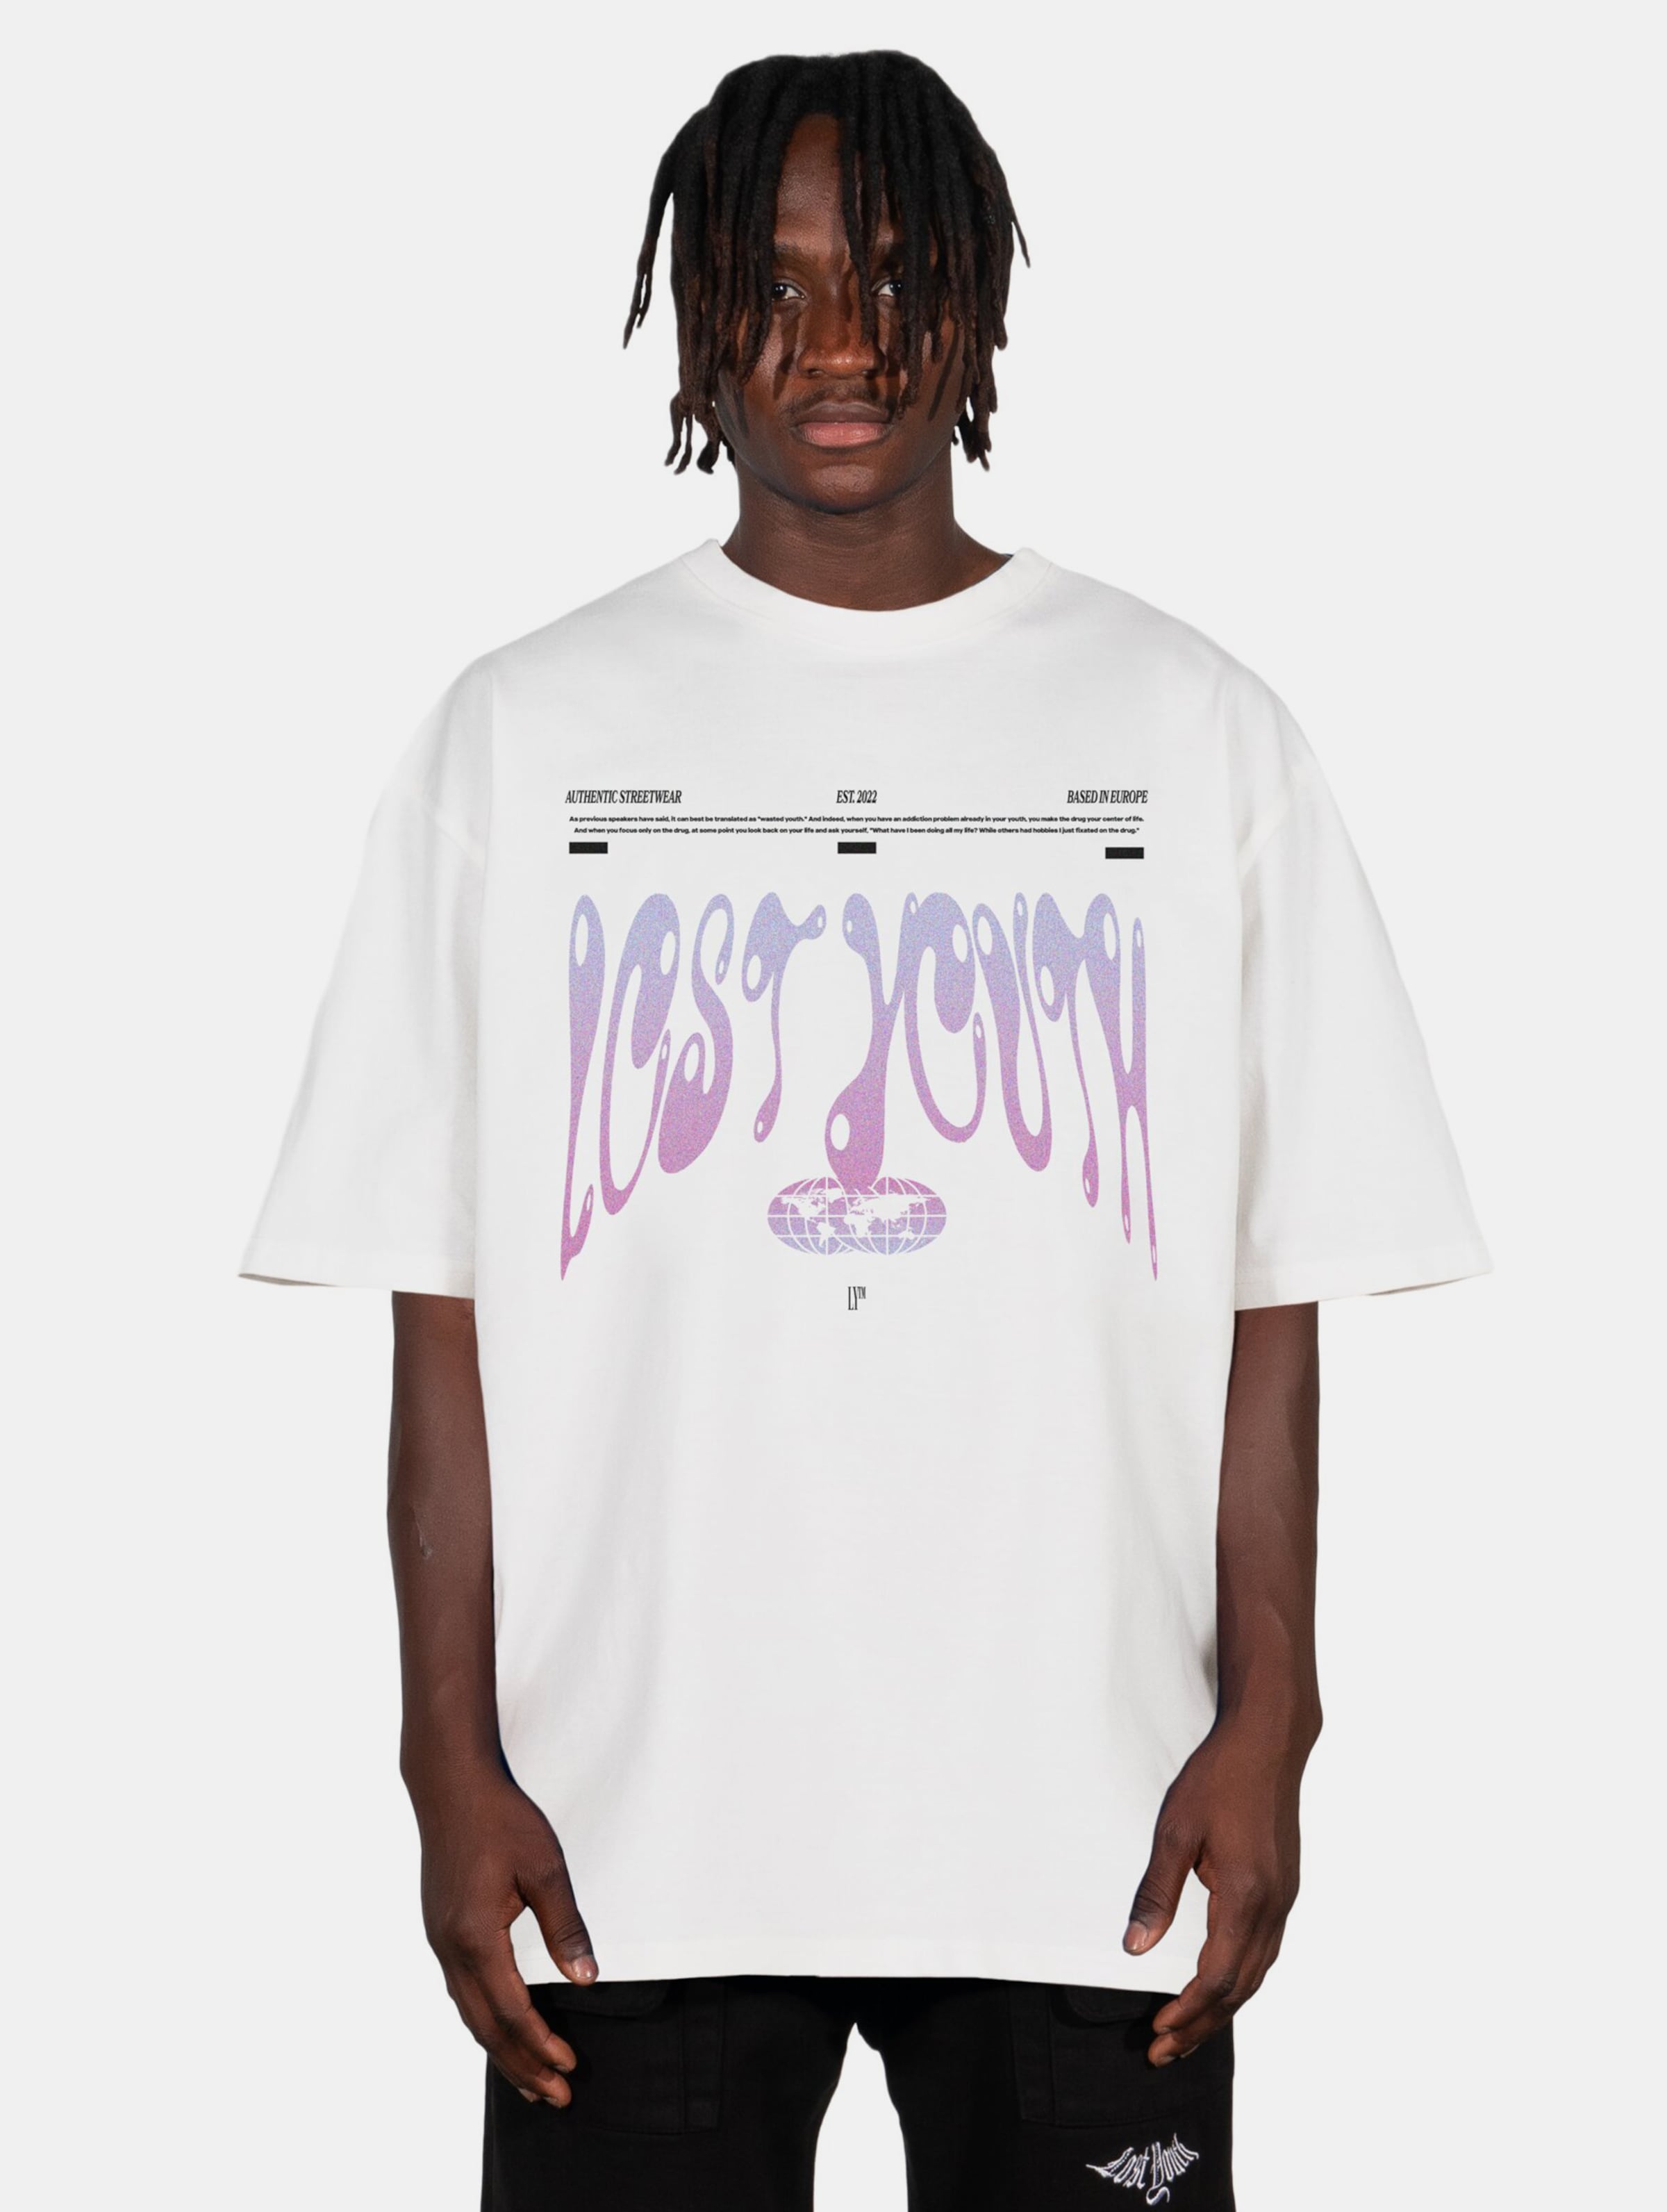 Lost Youth LY TEE- AUTHENTIC Männer,Unisex op kleur wit, Maat XXL